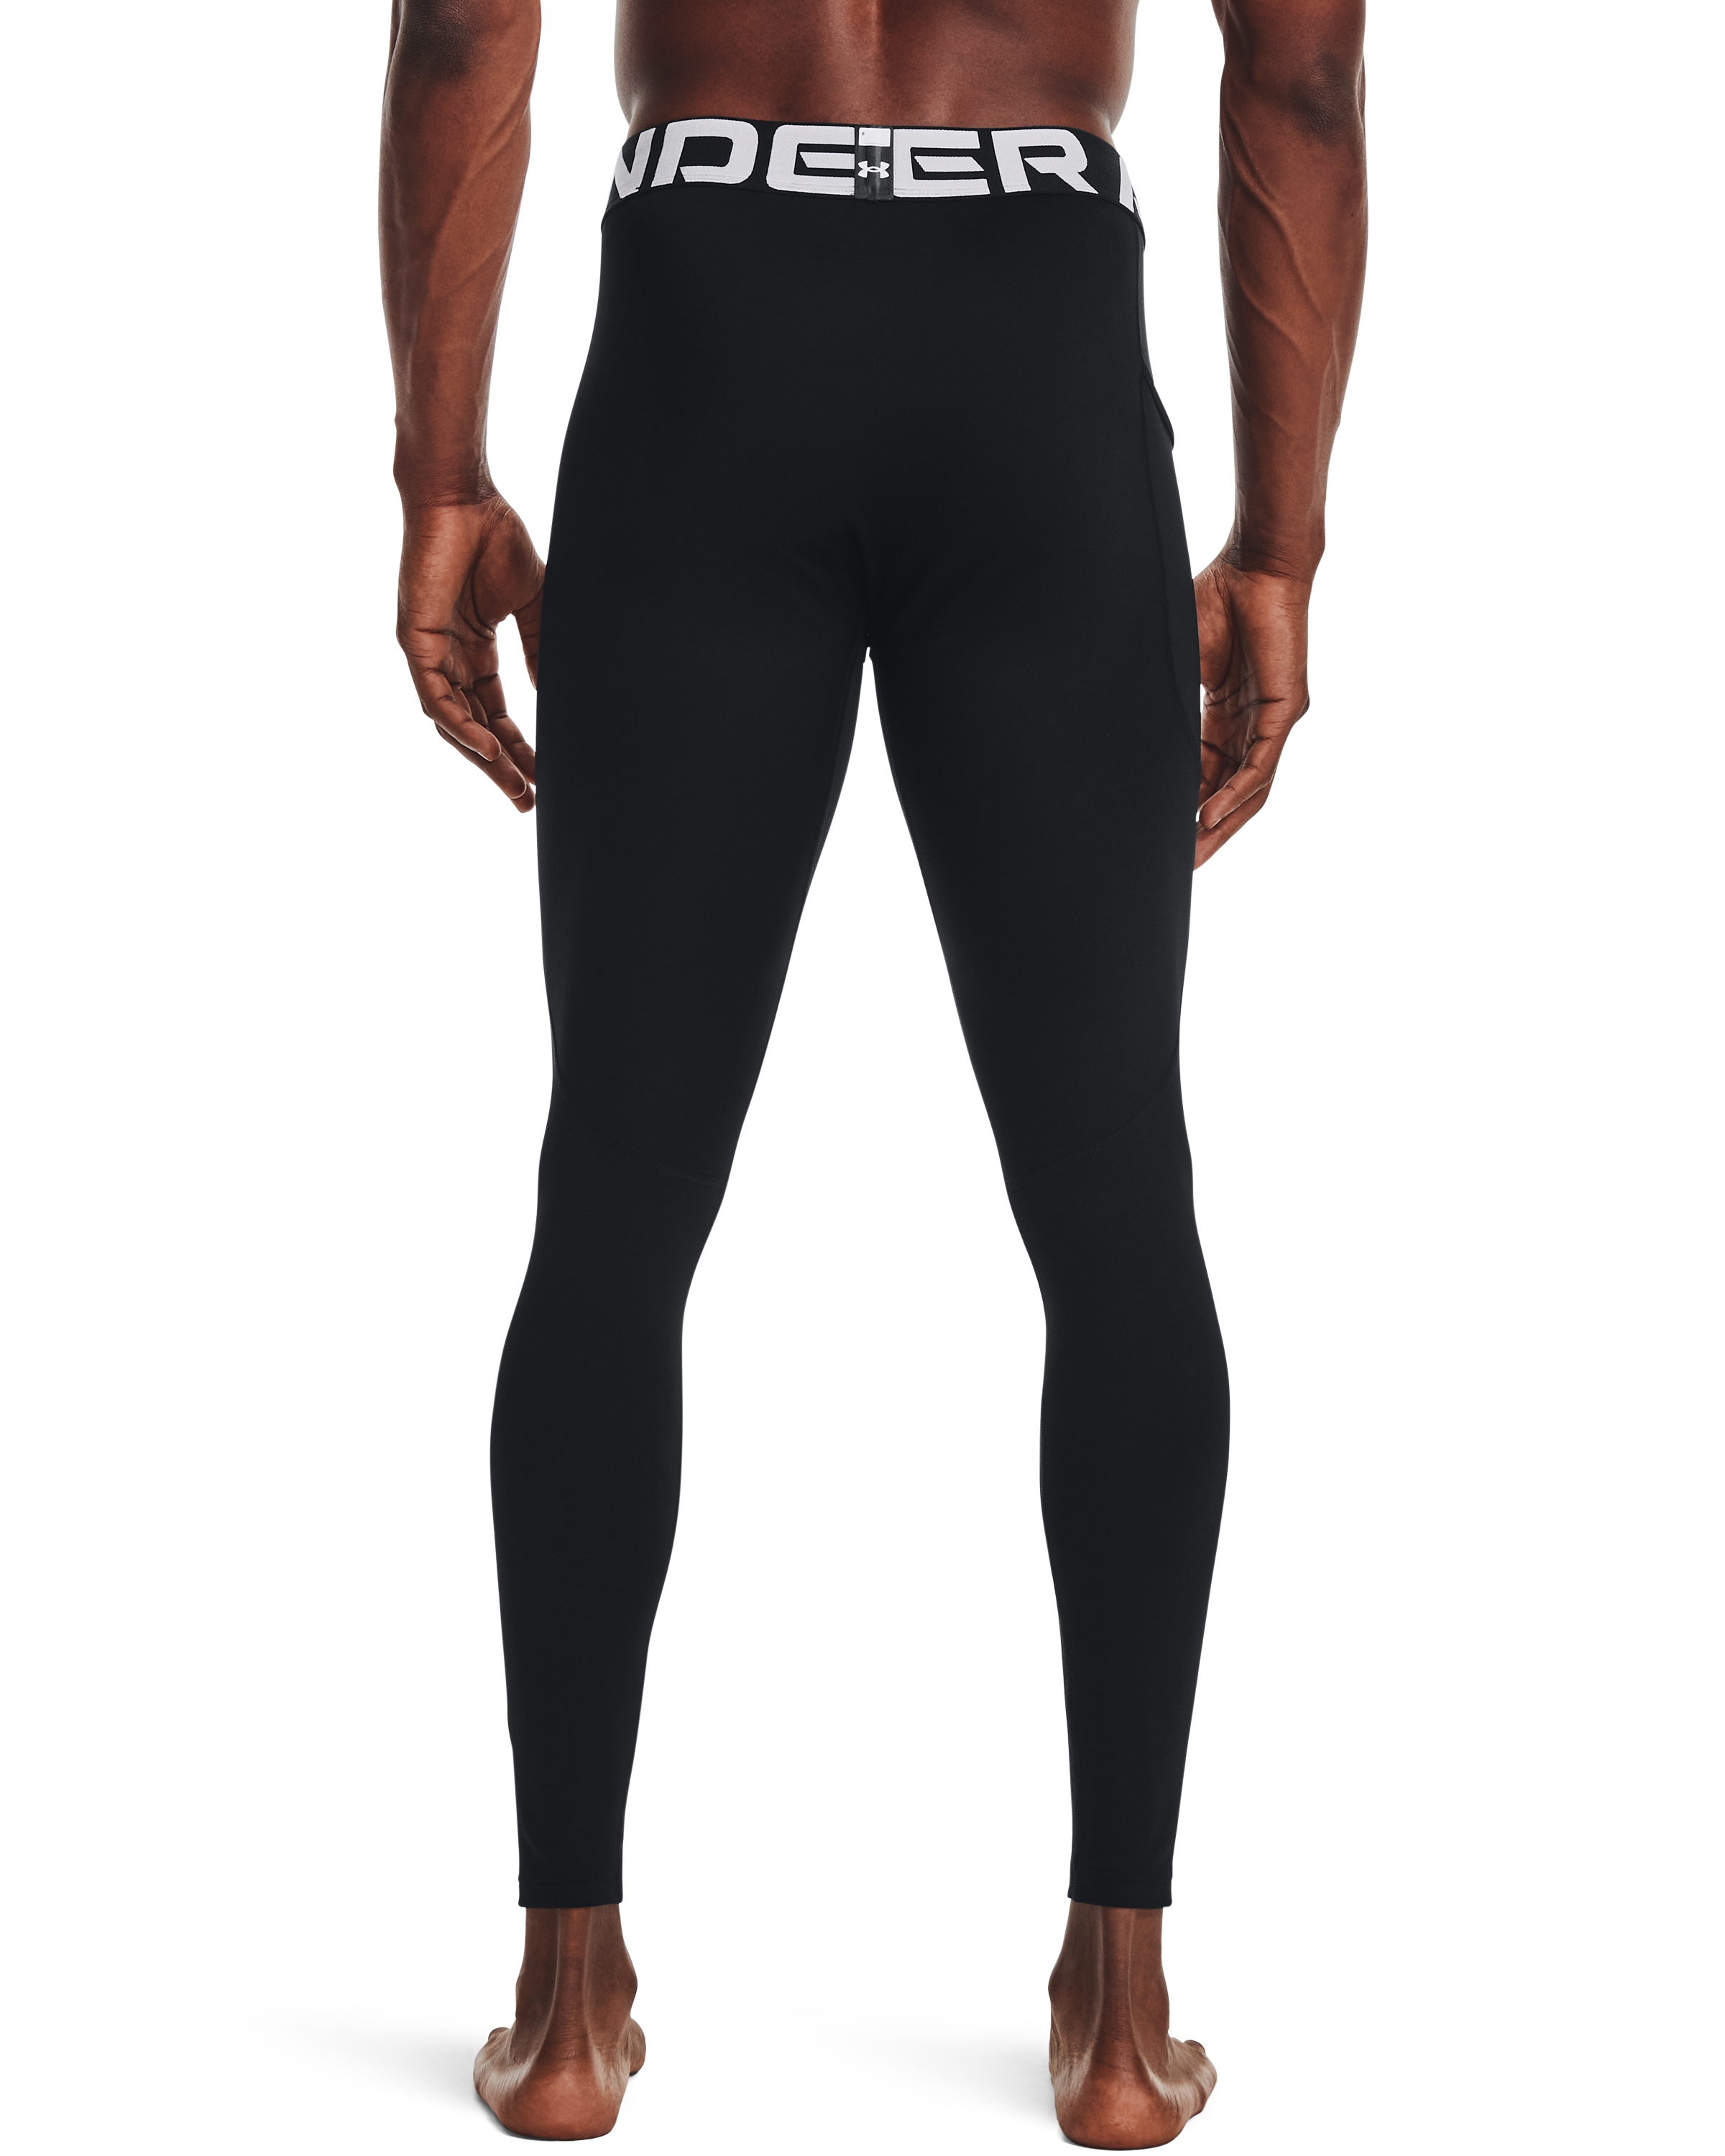 Under Armor's ColdGear Leggings Are On Sale For 40 Percent Off On